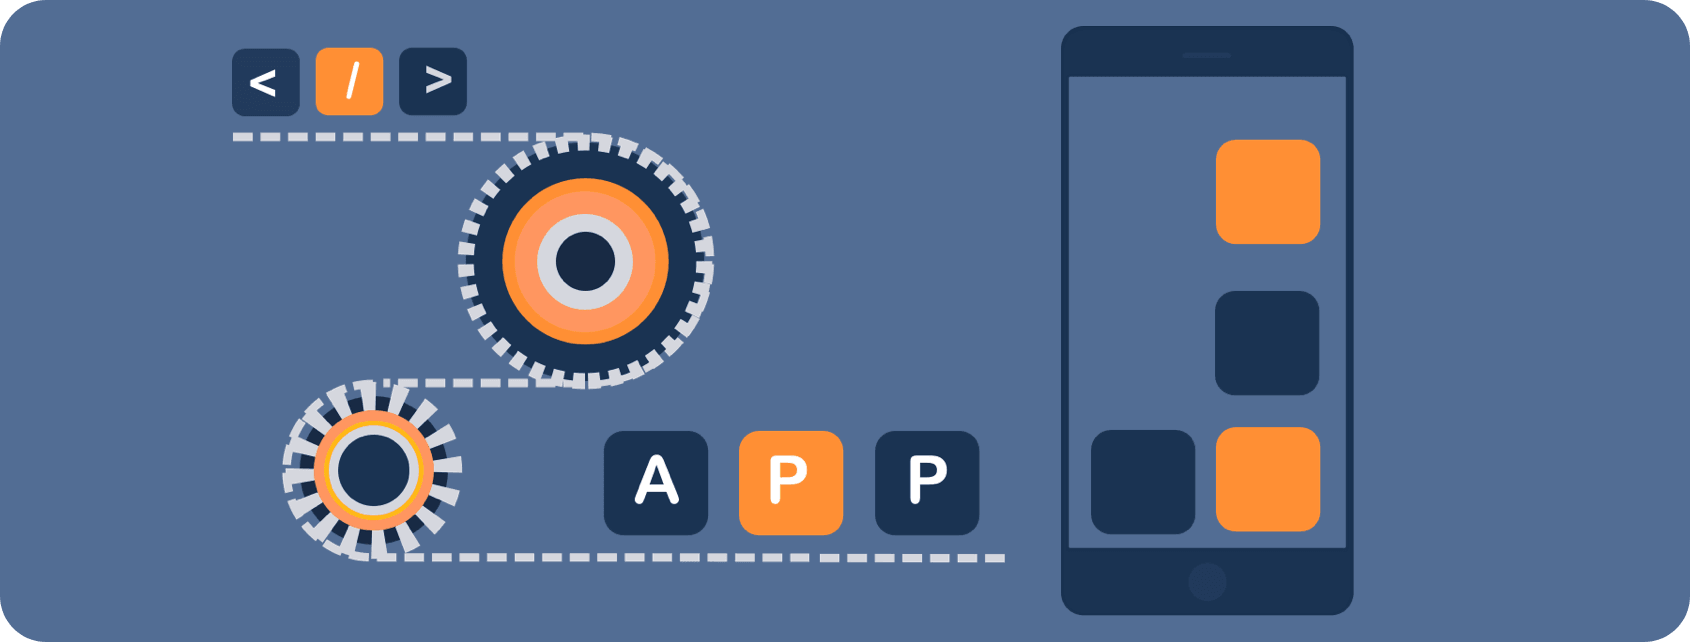 10 Common Problems in the Mobile App Lifecycle and How Appcircle Solves Them